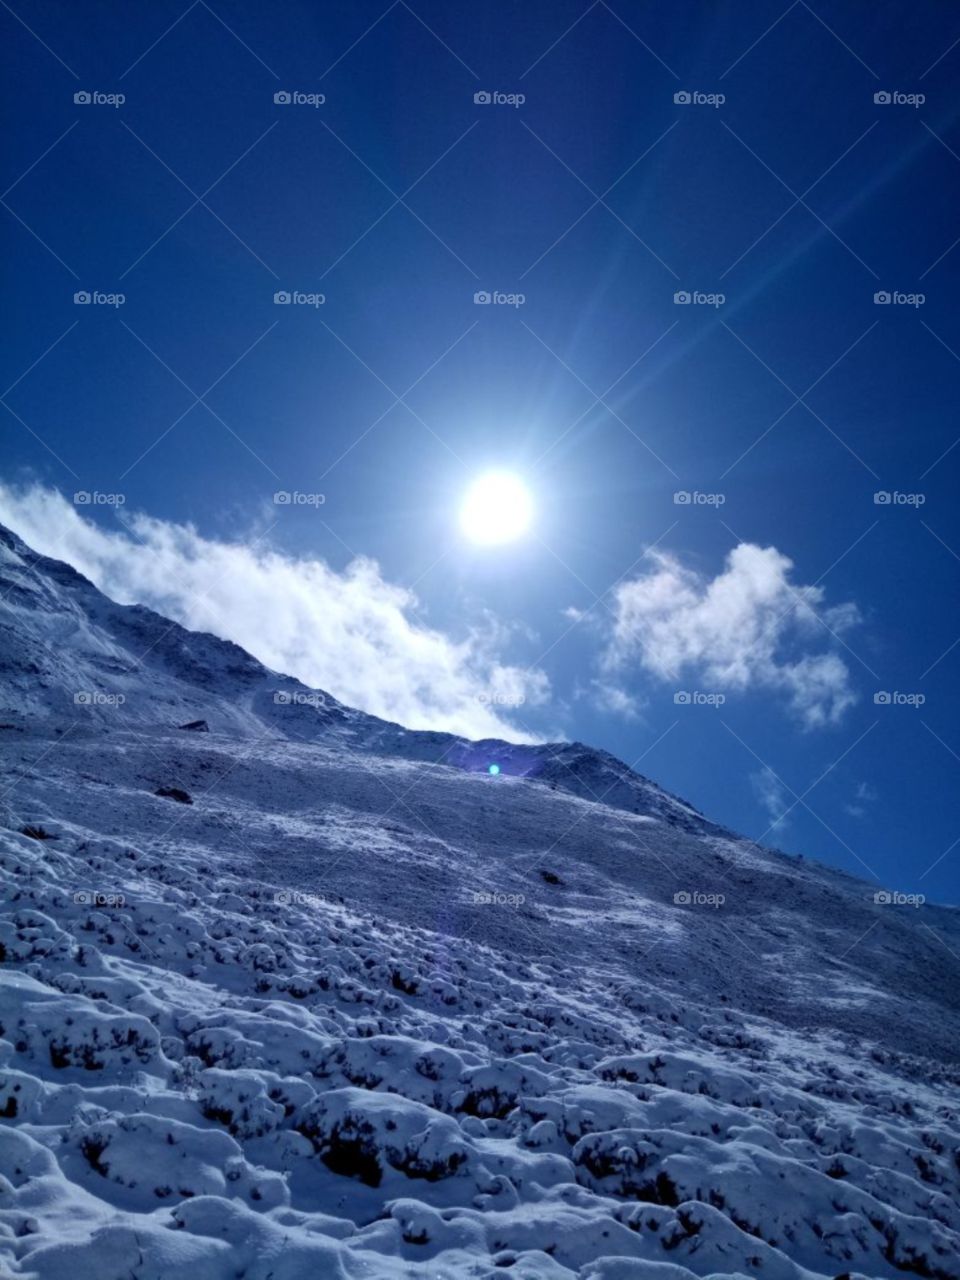 snow covered mountains very beautifully and the sun rises with the rays that fall on the snow and it looks really nice the clouds are travelling with the sun they want to hide the sun